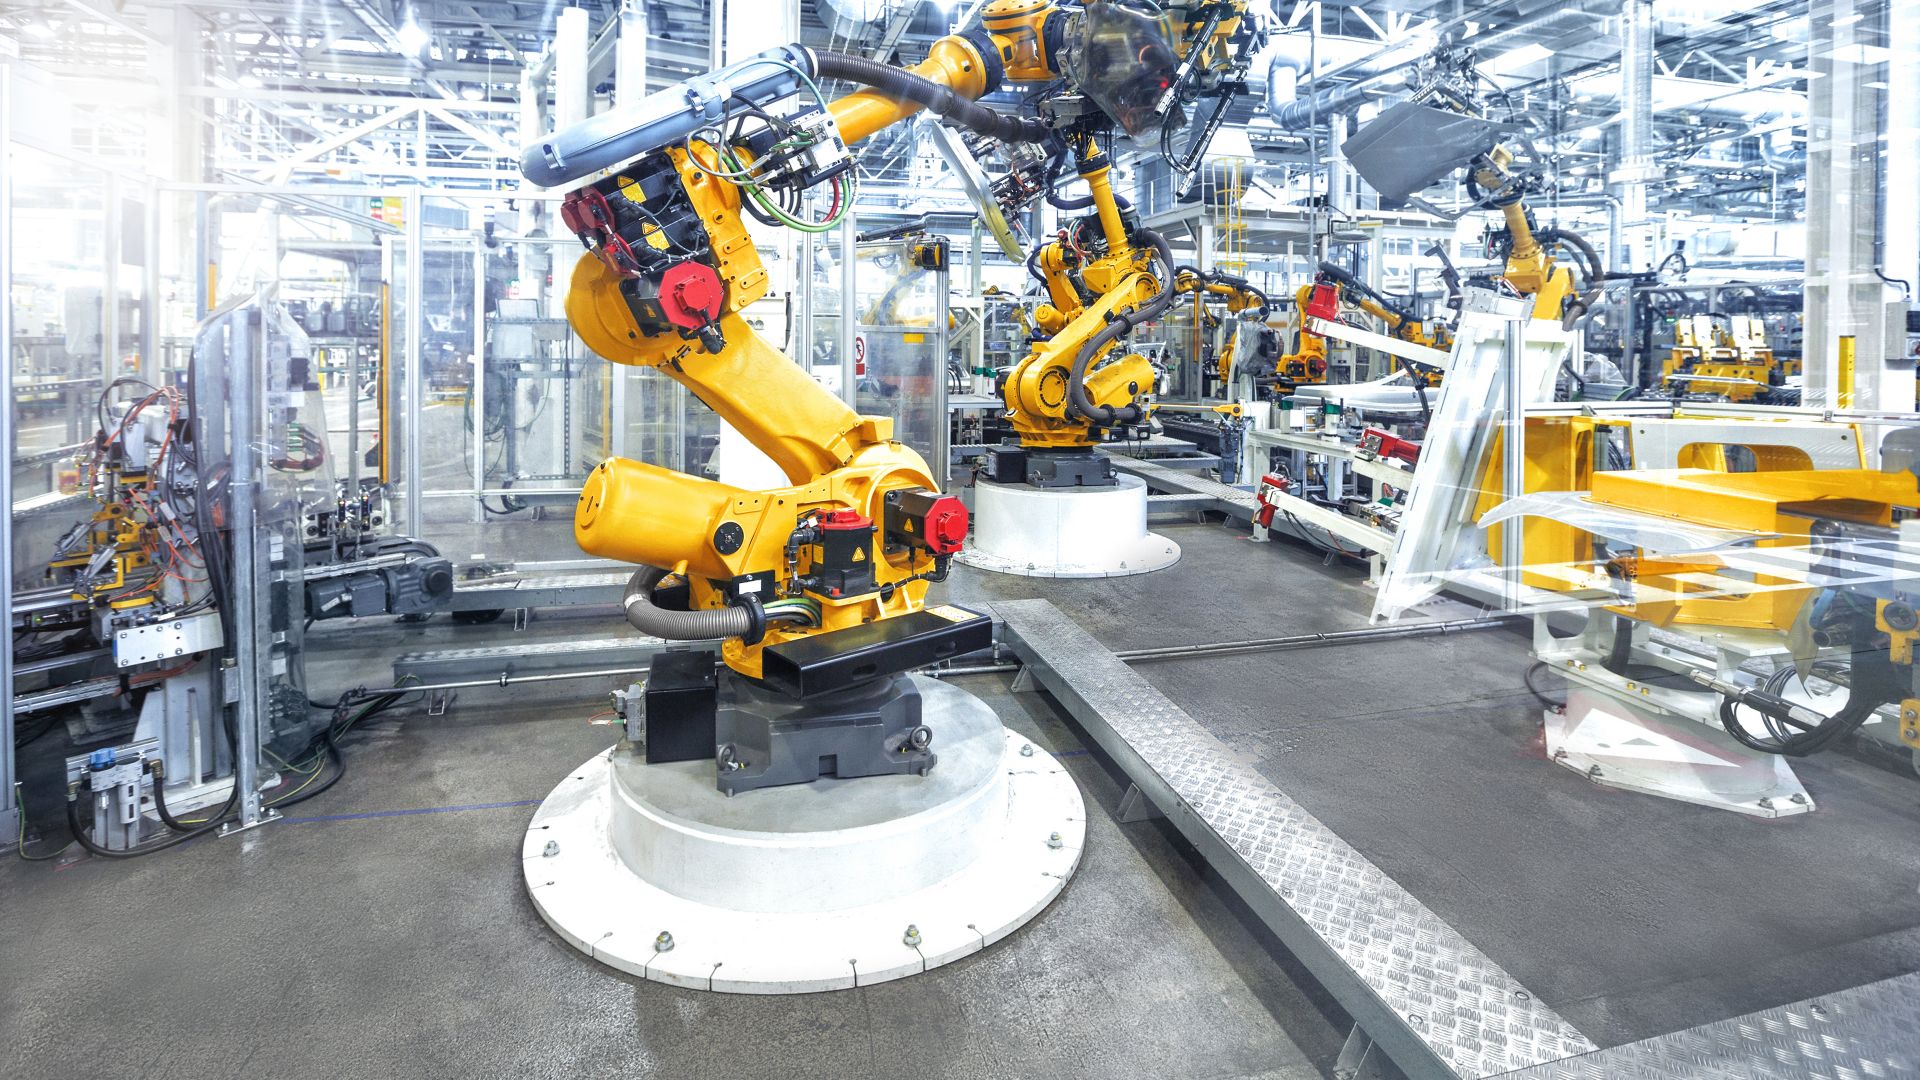 Robotic arms in a car plant manufacturing warehouse